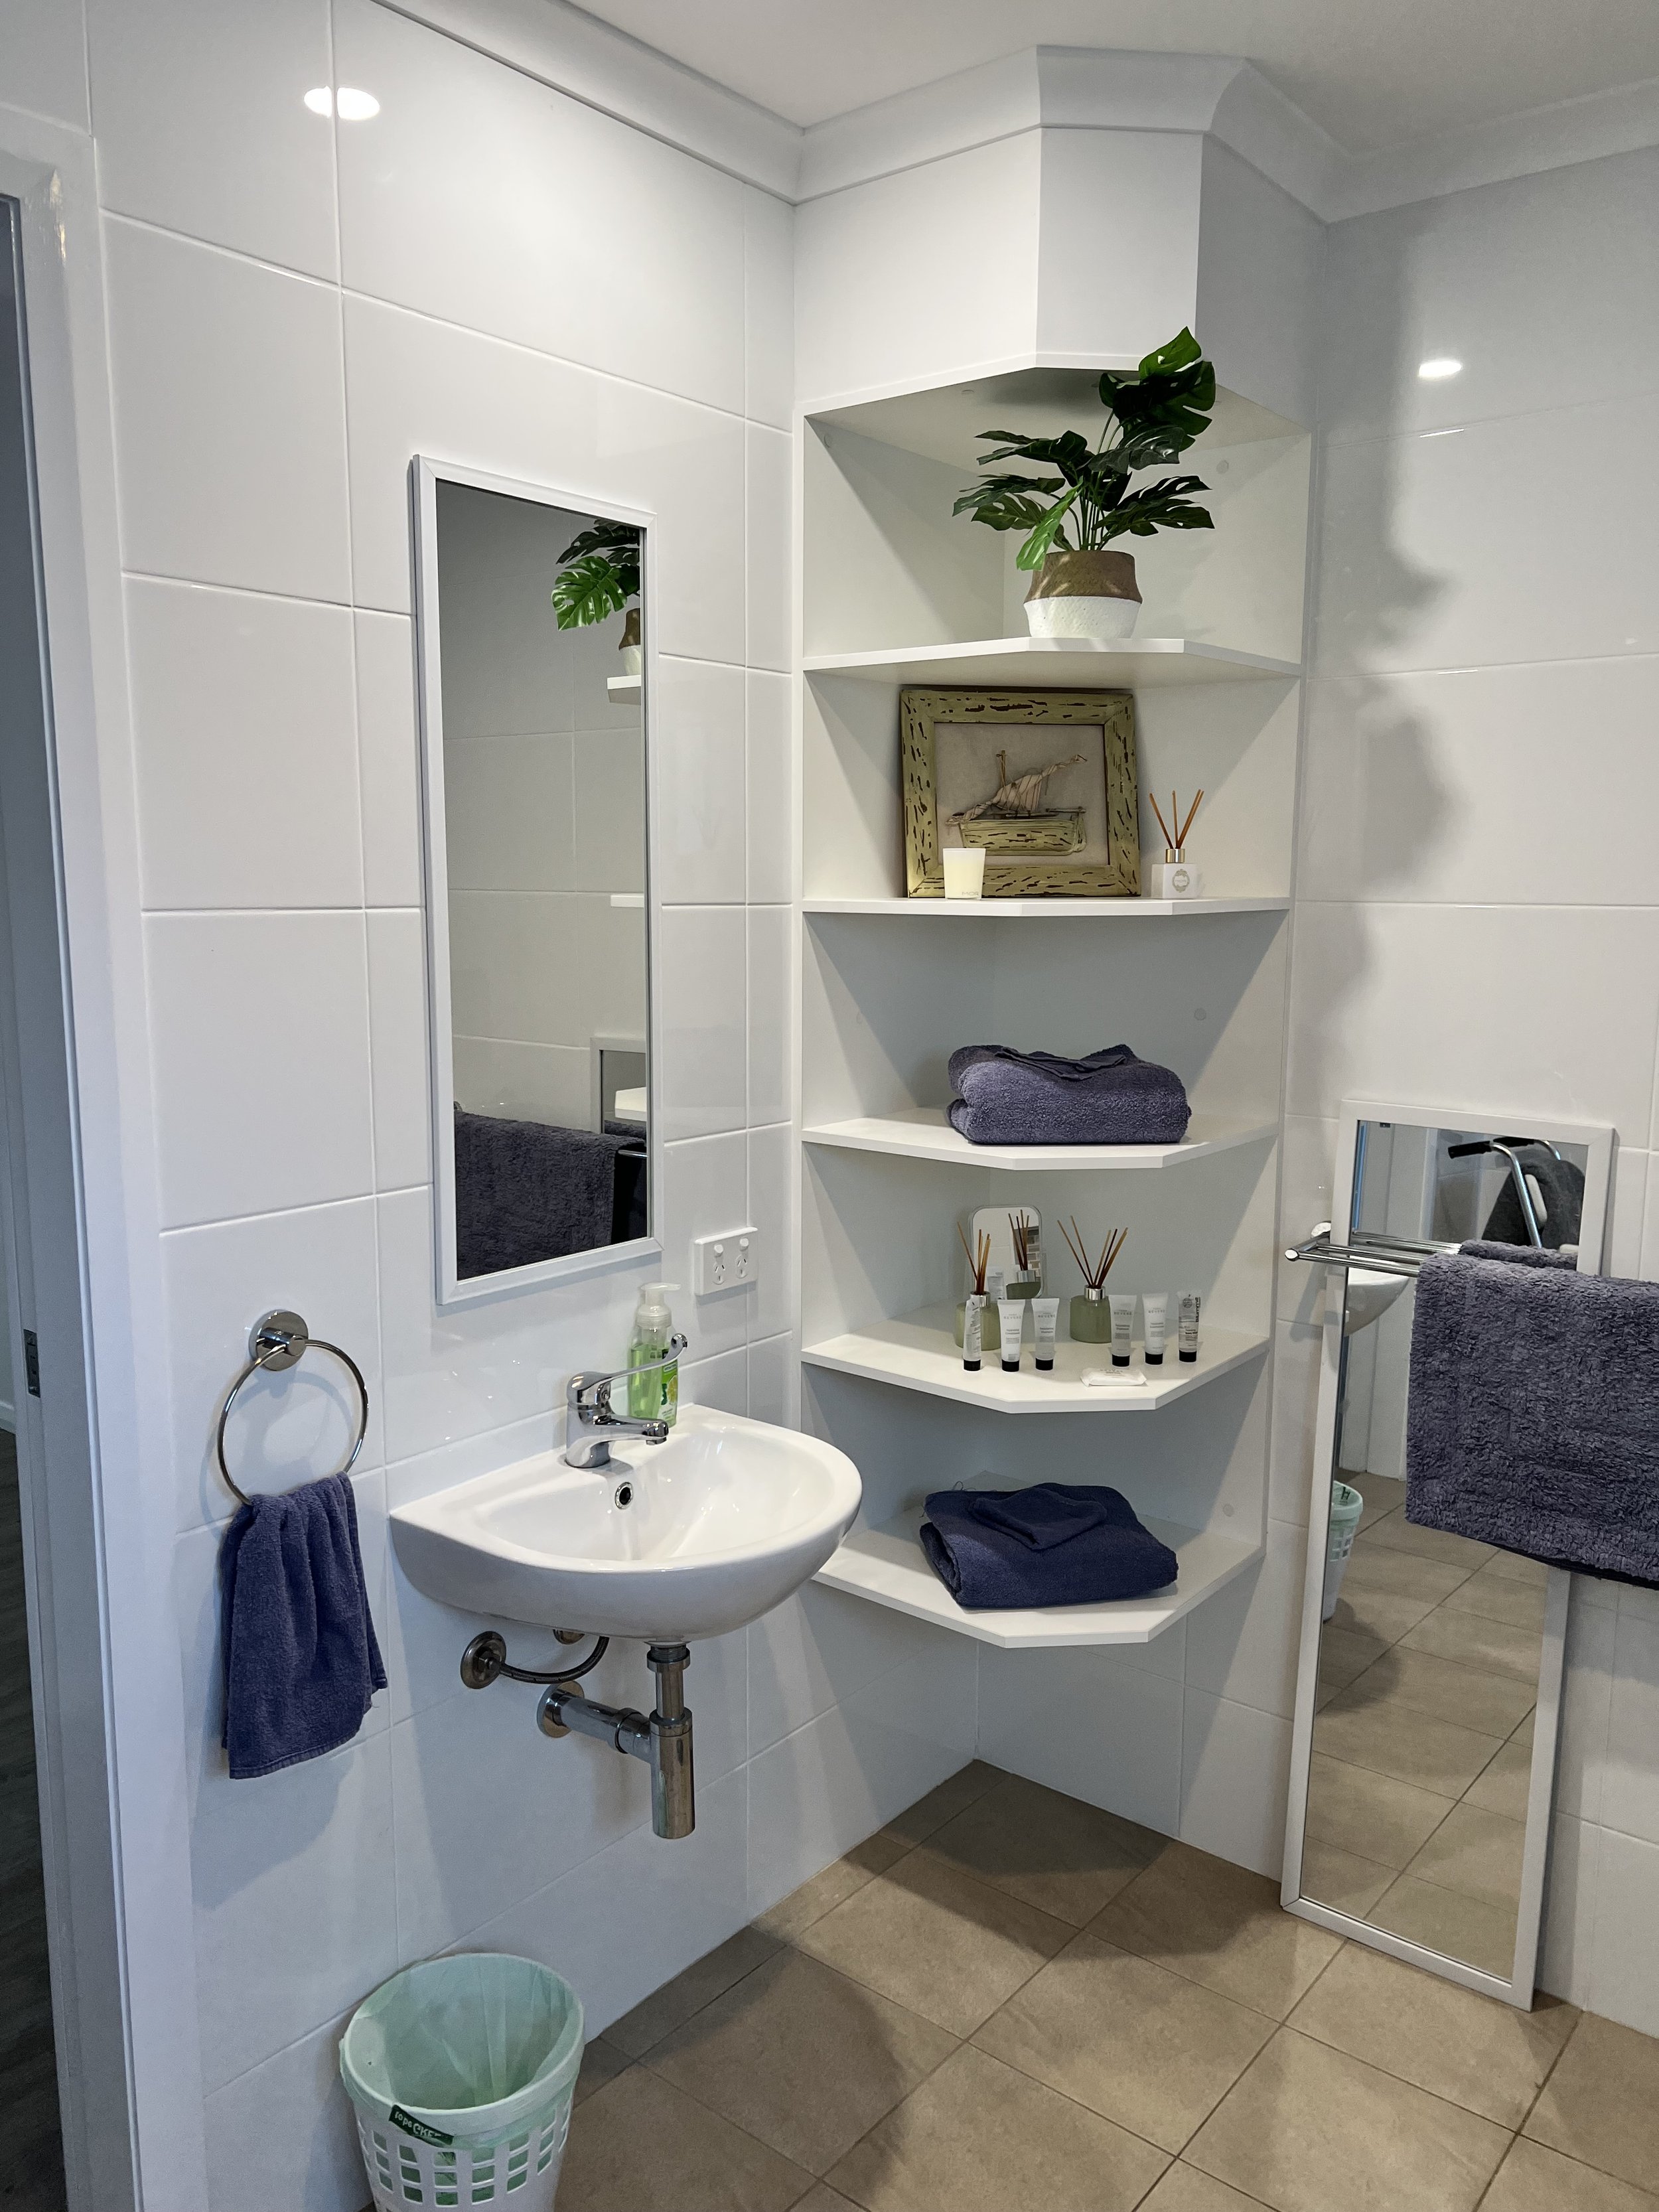 Modern bathroom with roll-under sink and shelving